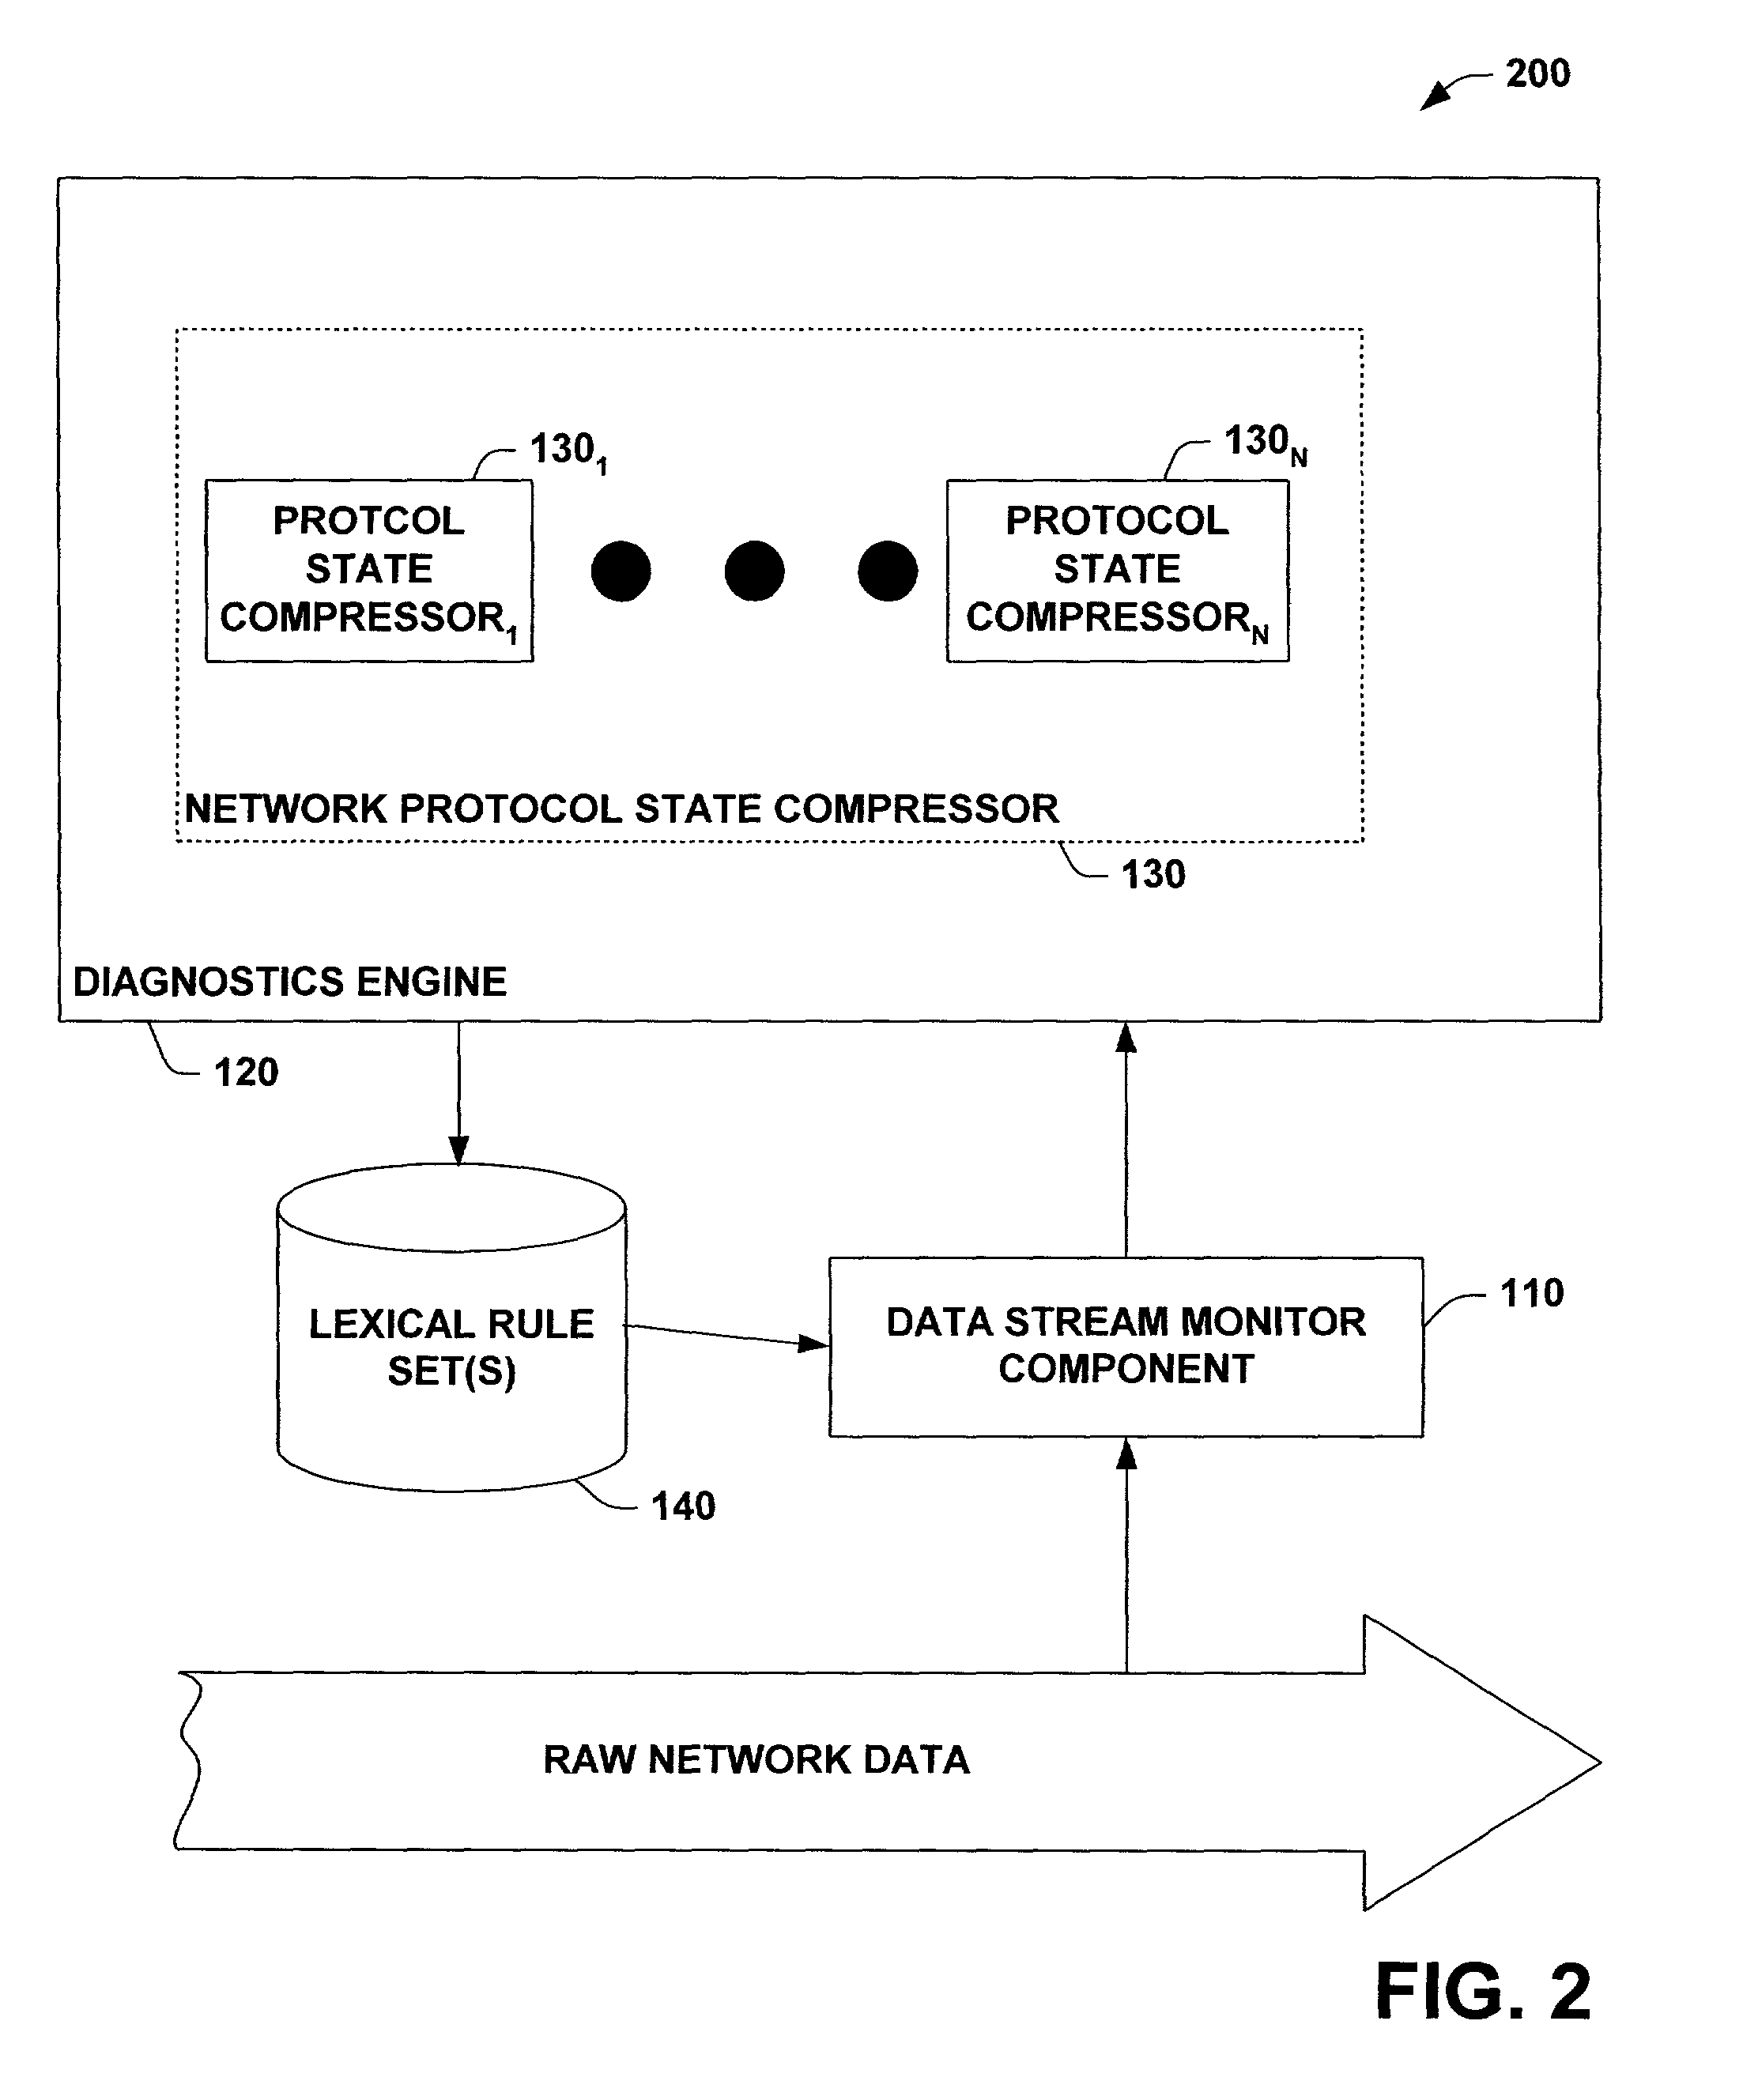 System and method facilitating network diagnostics and self-healing